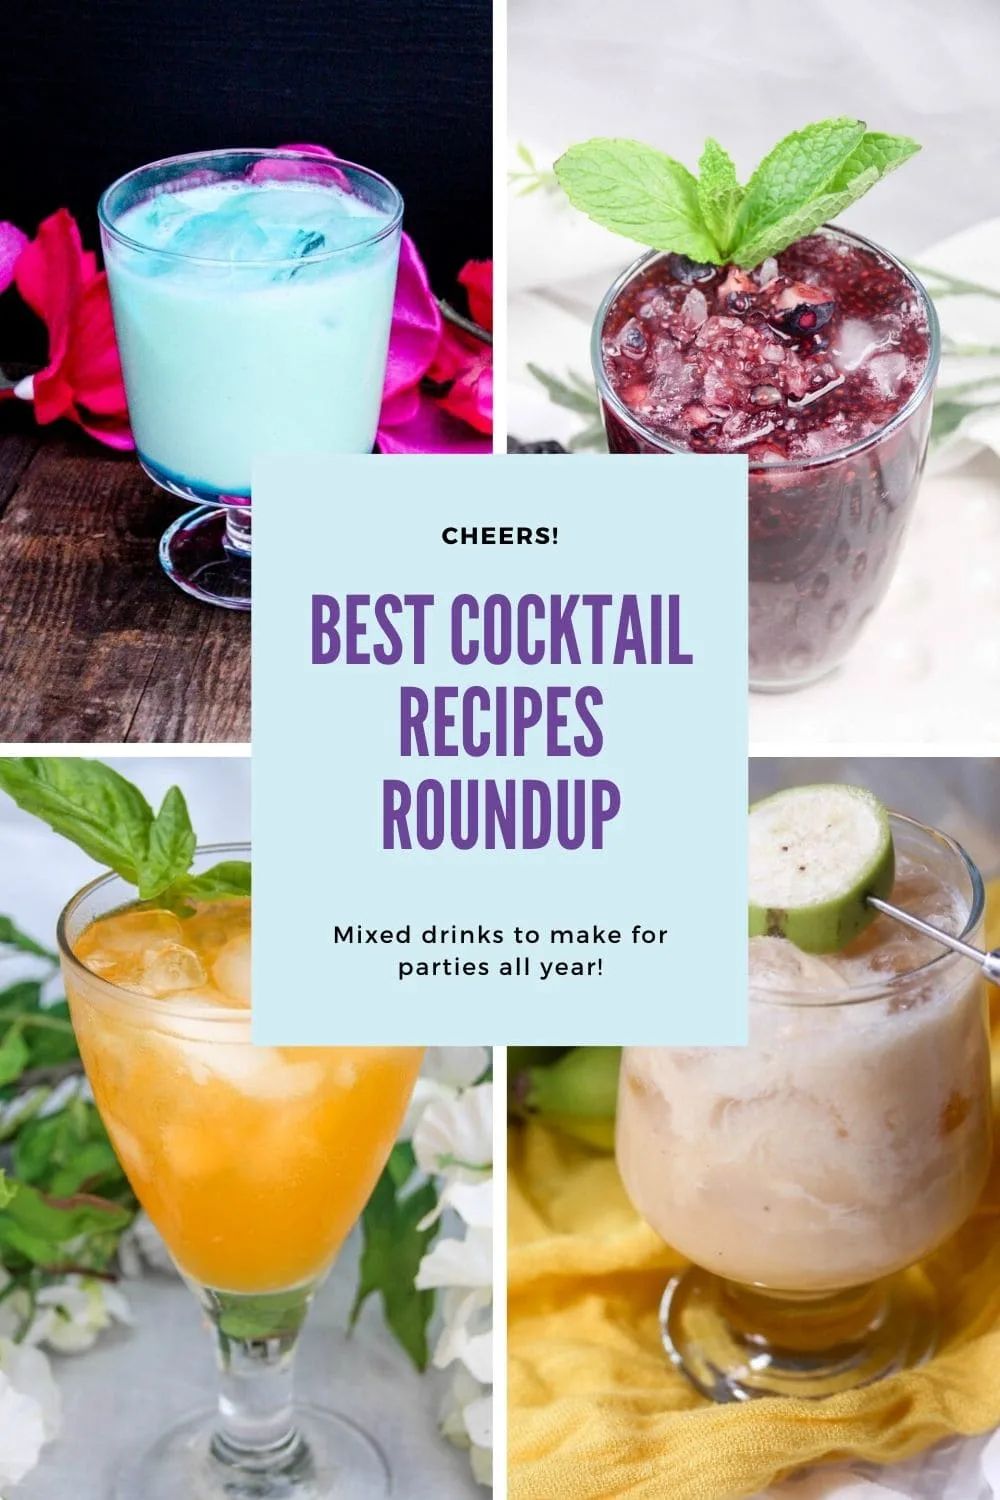 Top Cocktail Recipes to Impress your Friends | A Magical